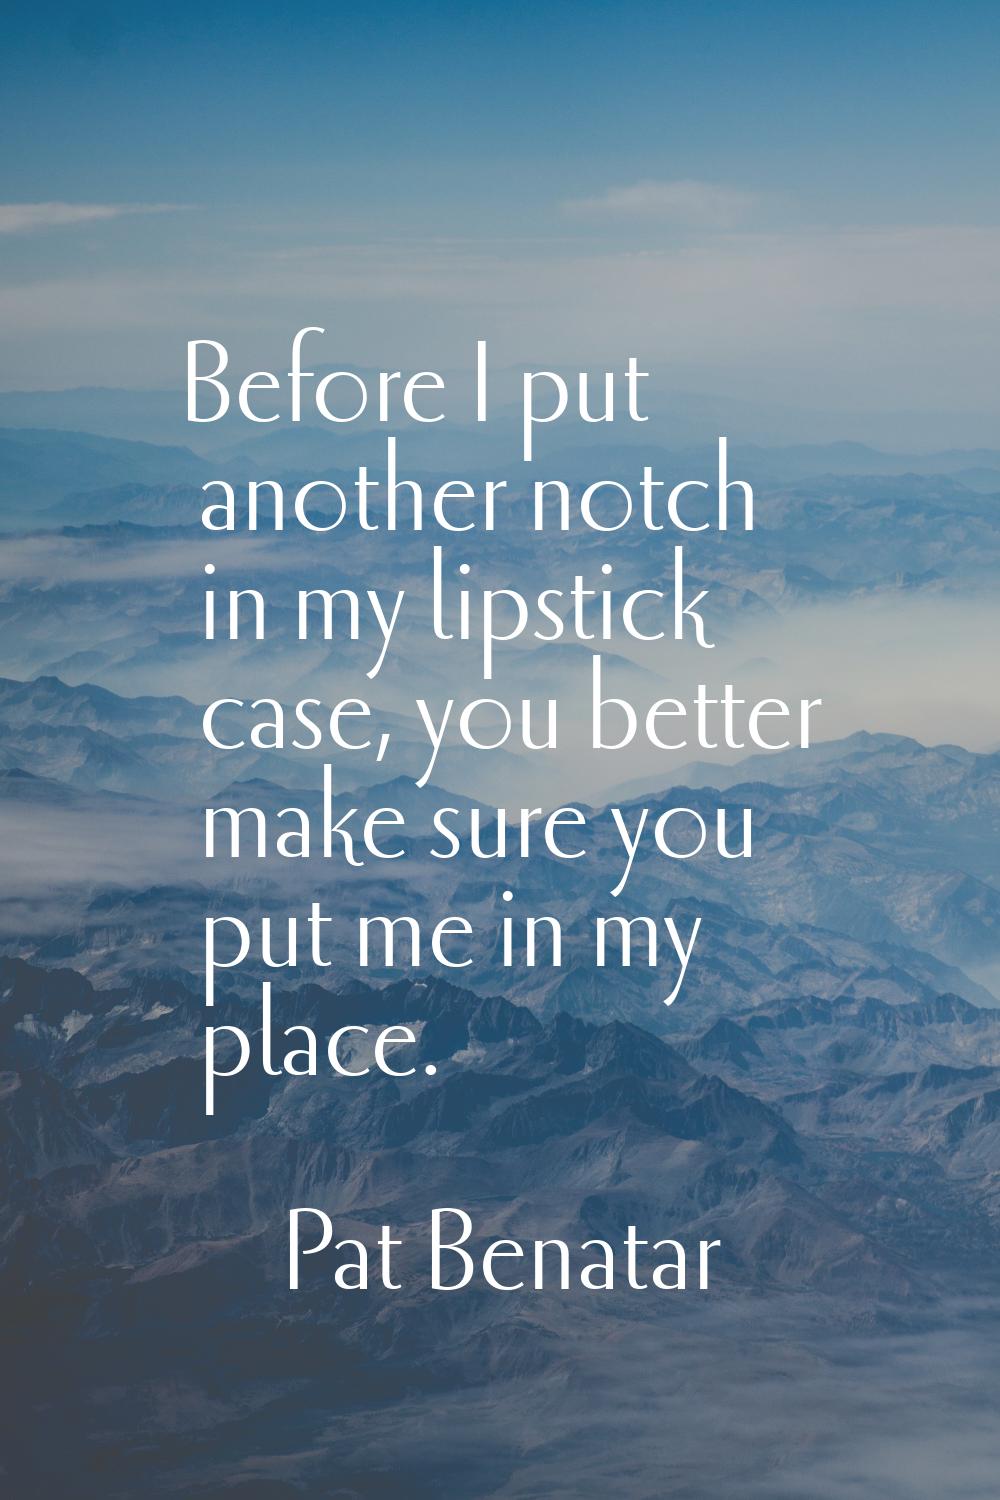 Before I put another notch in my lipstick case, you better make sure you put me in my place.